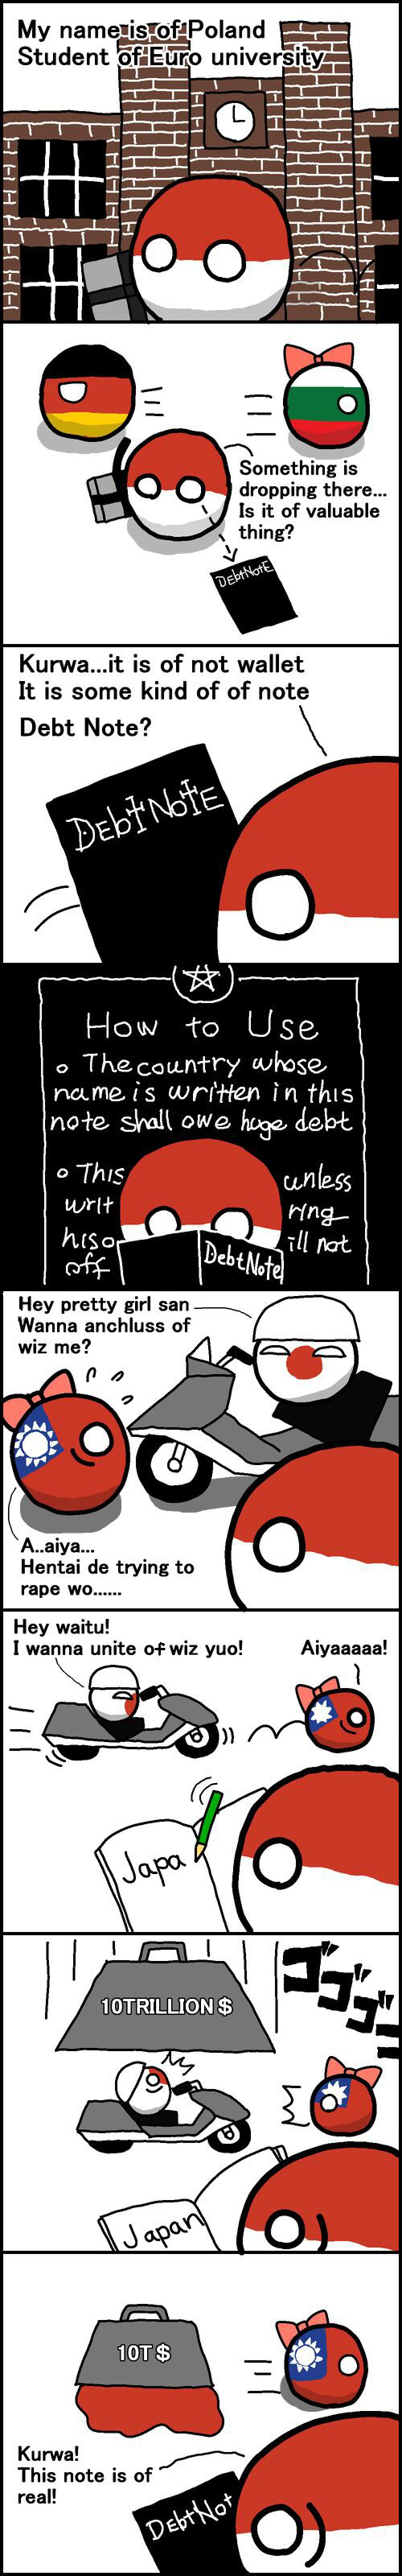 Japan can into Debt